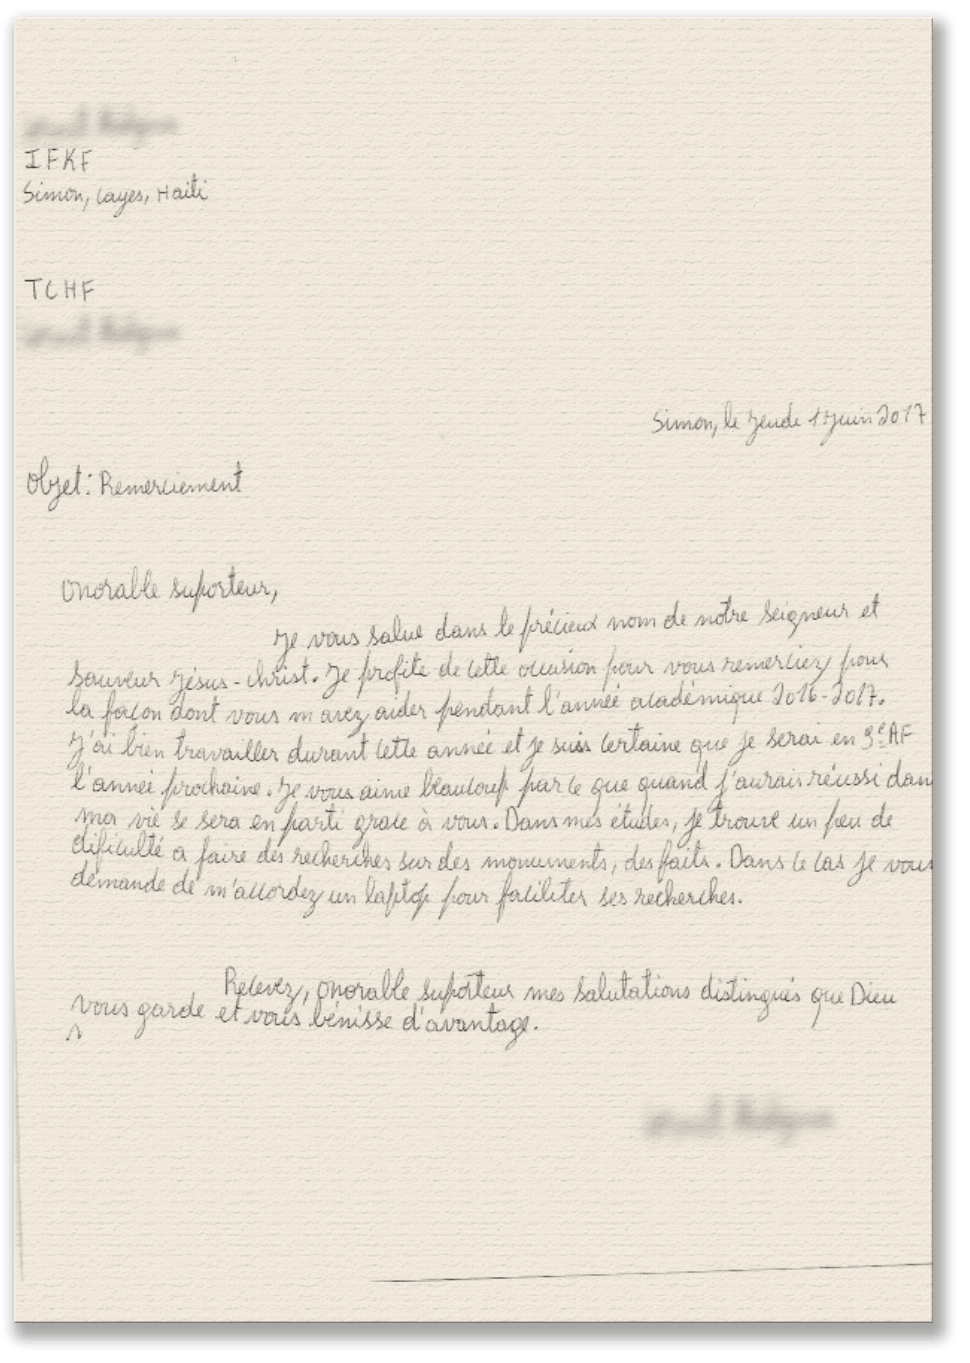 Letters from Students - The Children Heritage Foundation (tCHF)